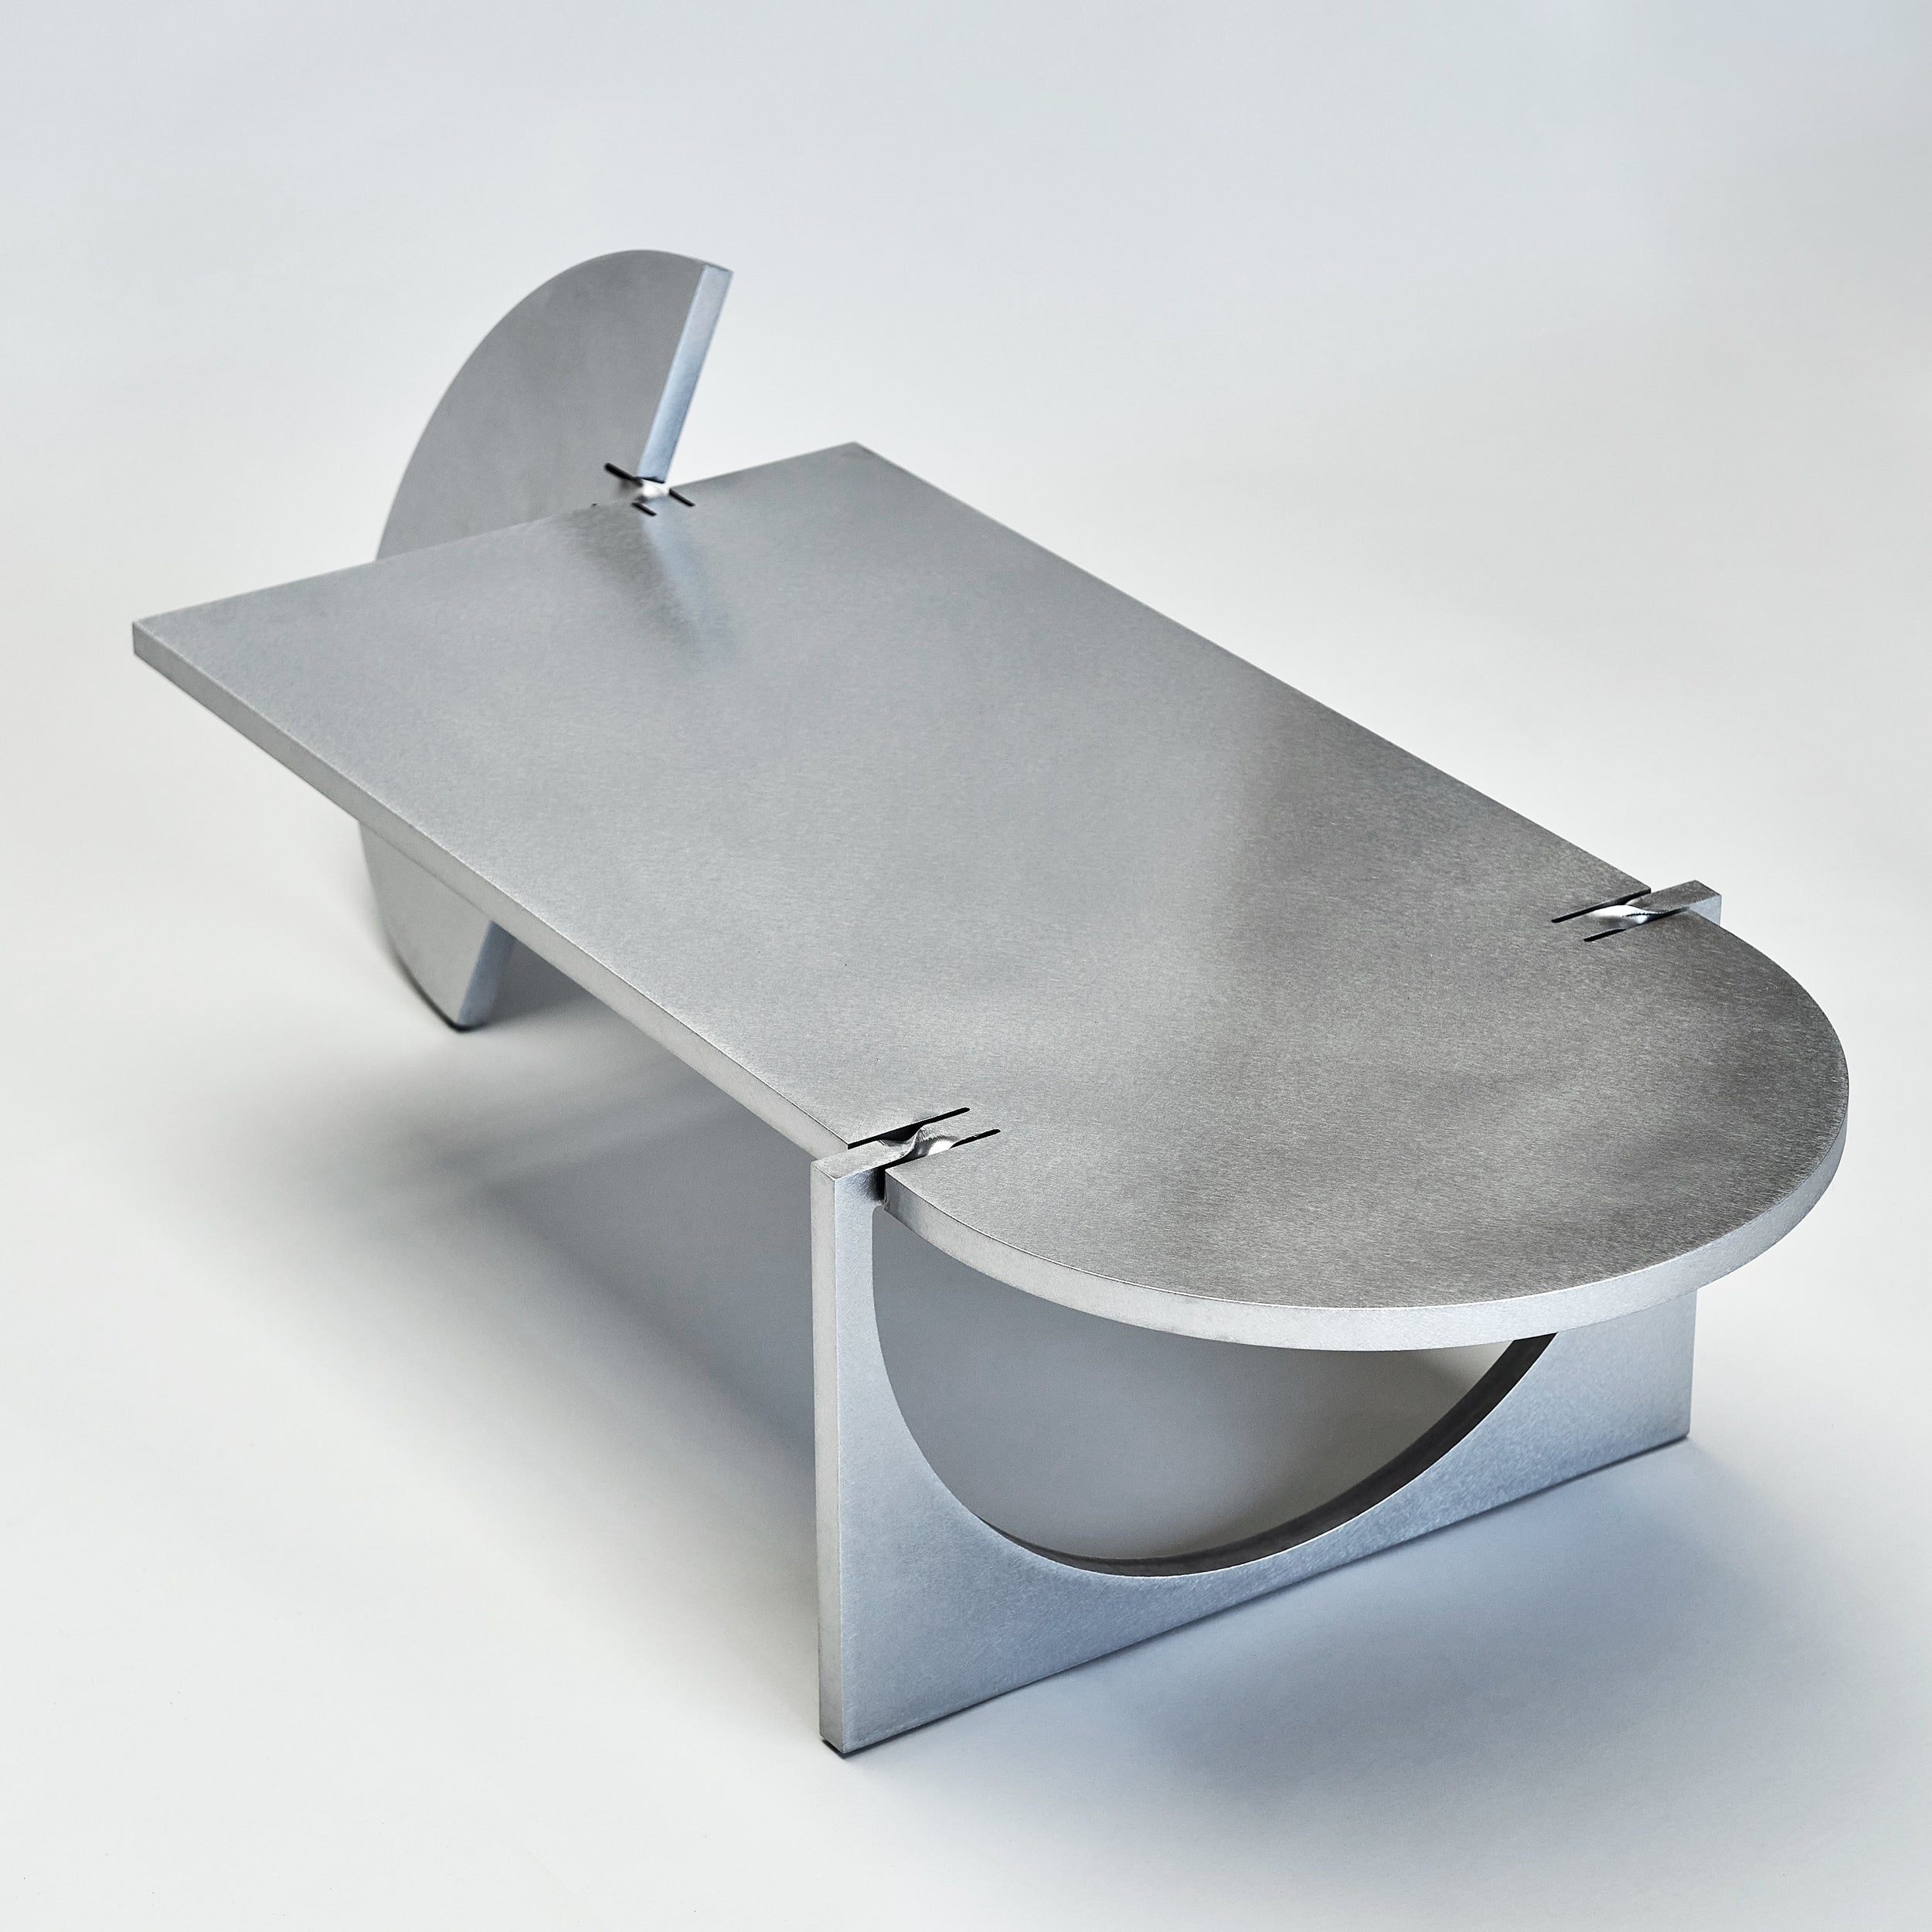 ONE Ridiculous Steel Table by Frank Penders